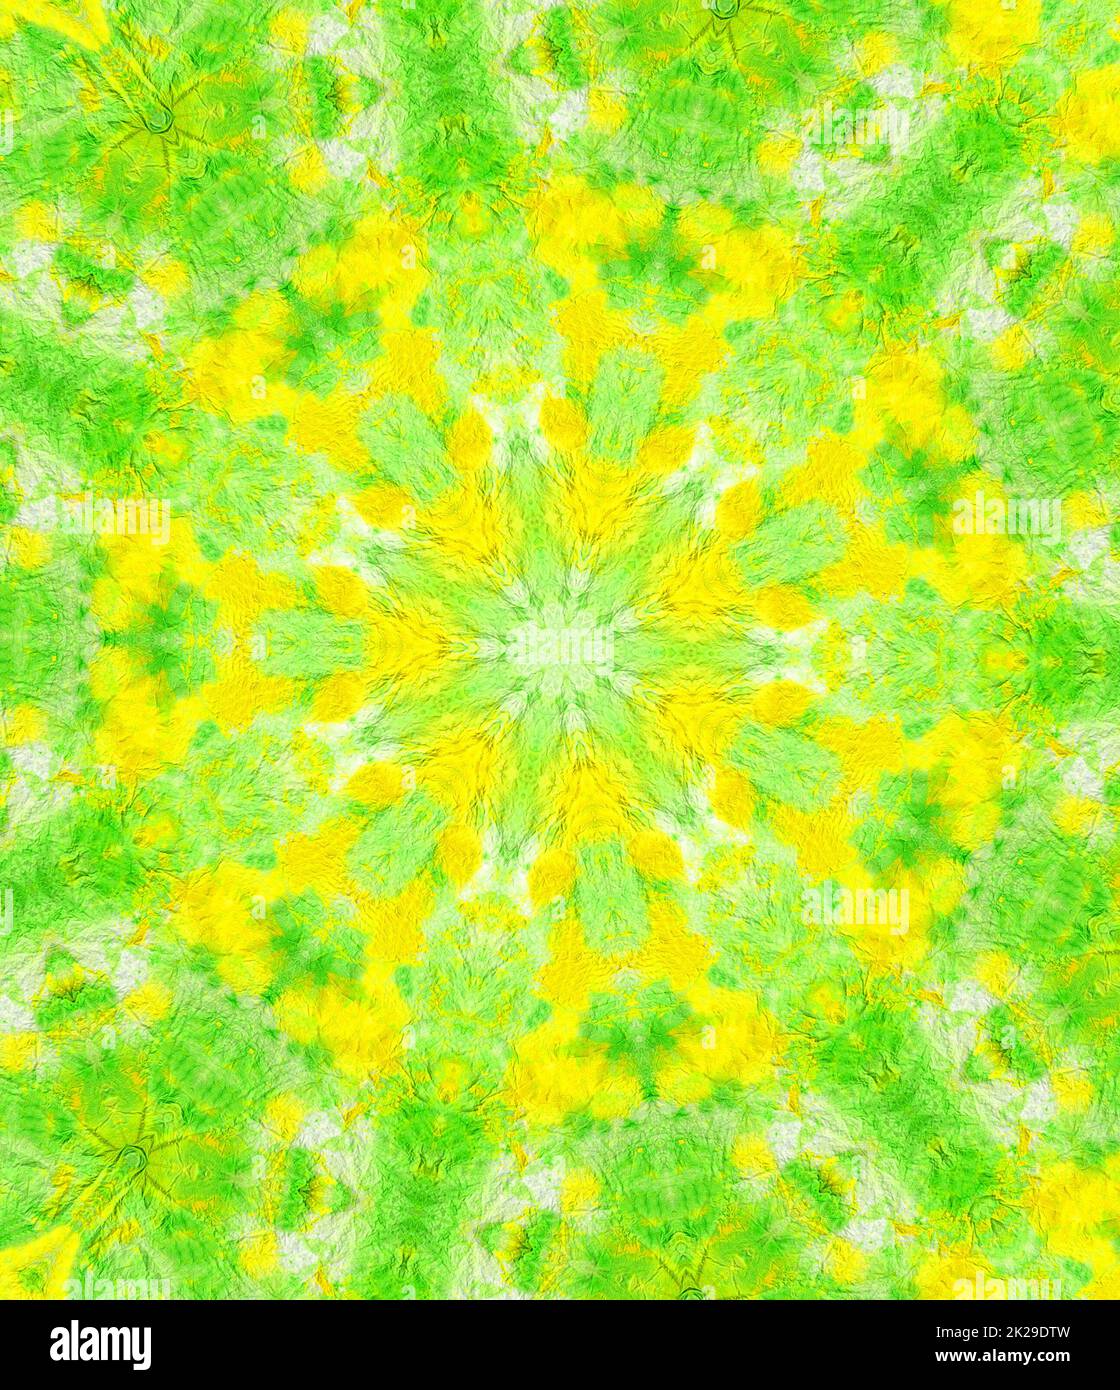 Hand Painted Background Green and Yellow Texture Stock Photo